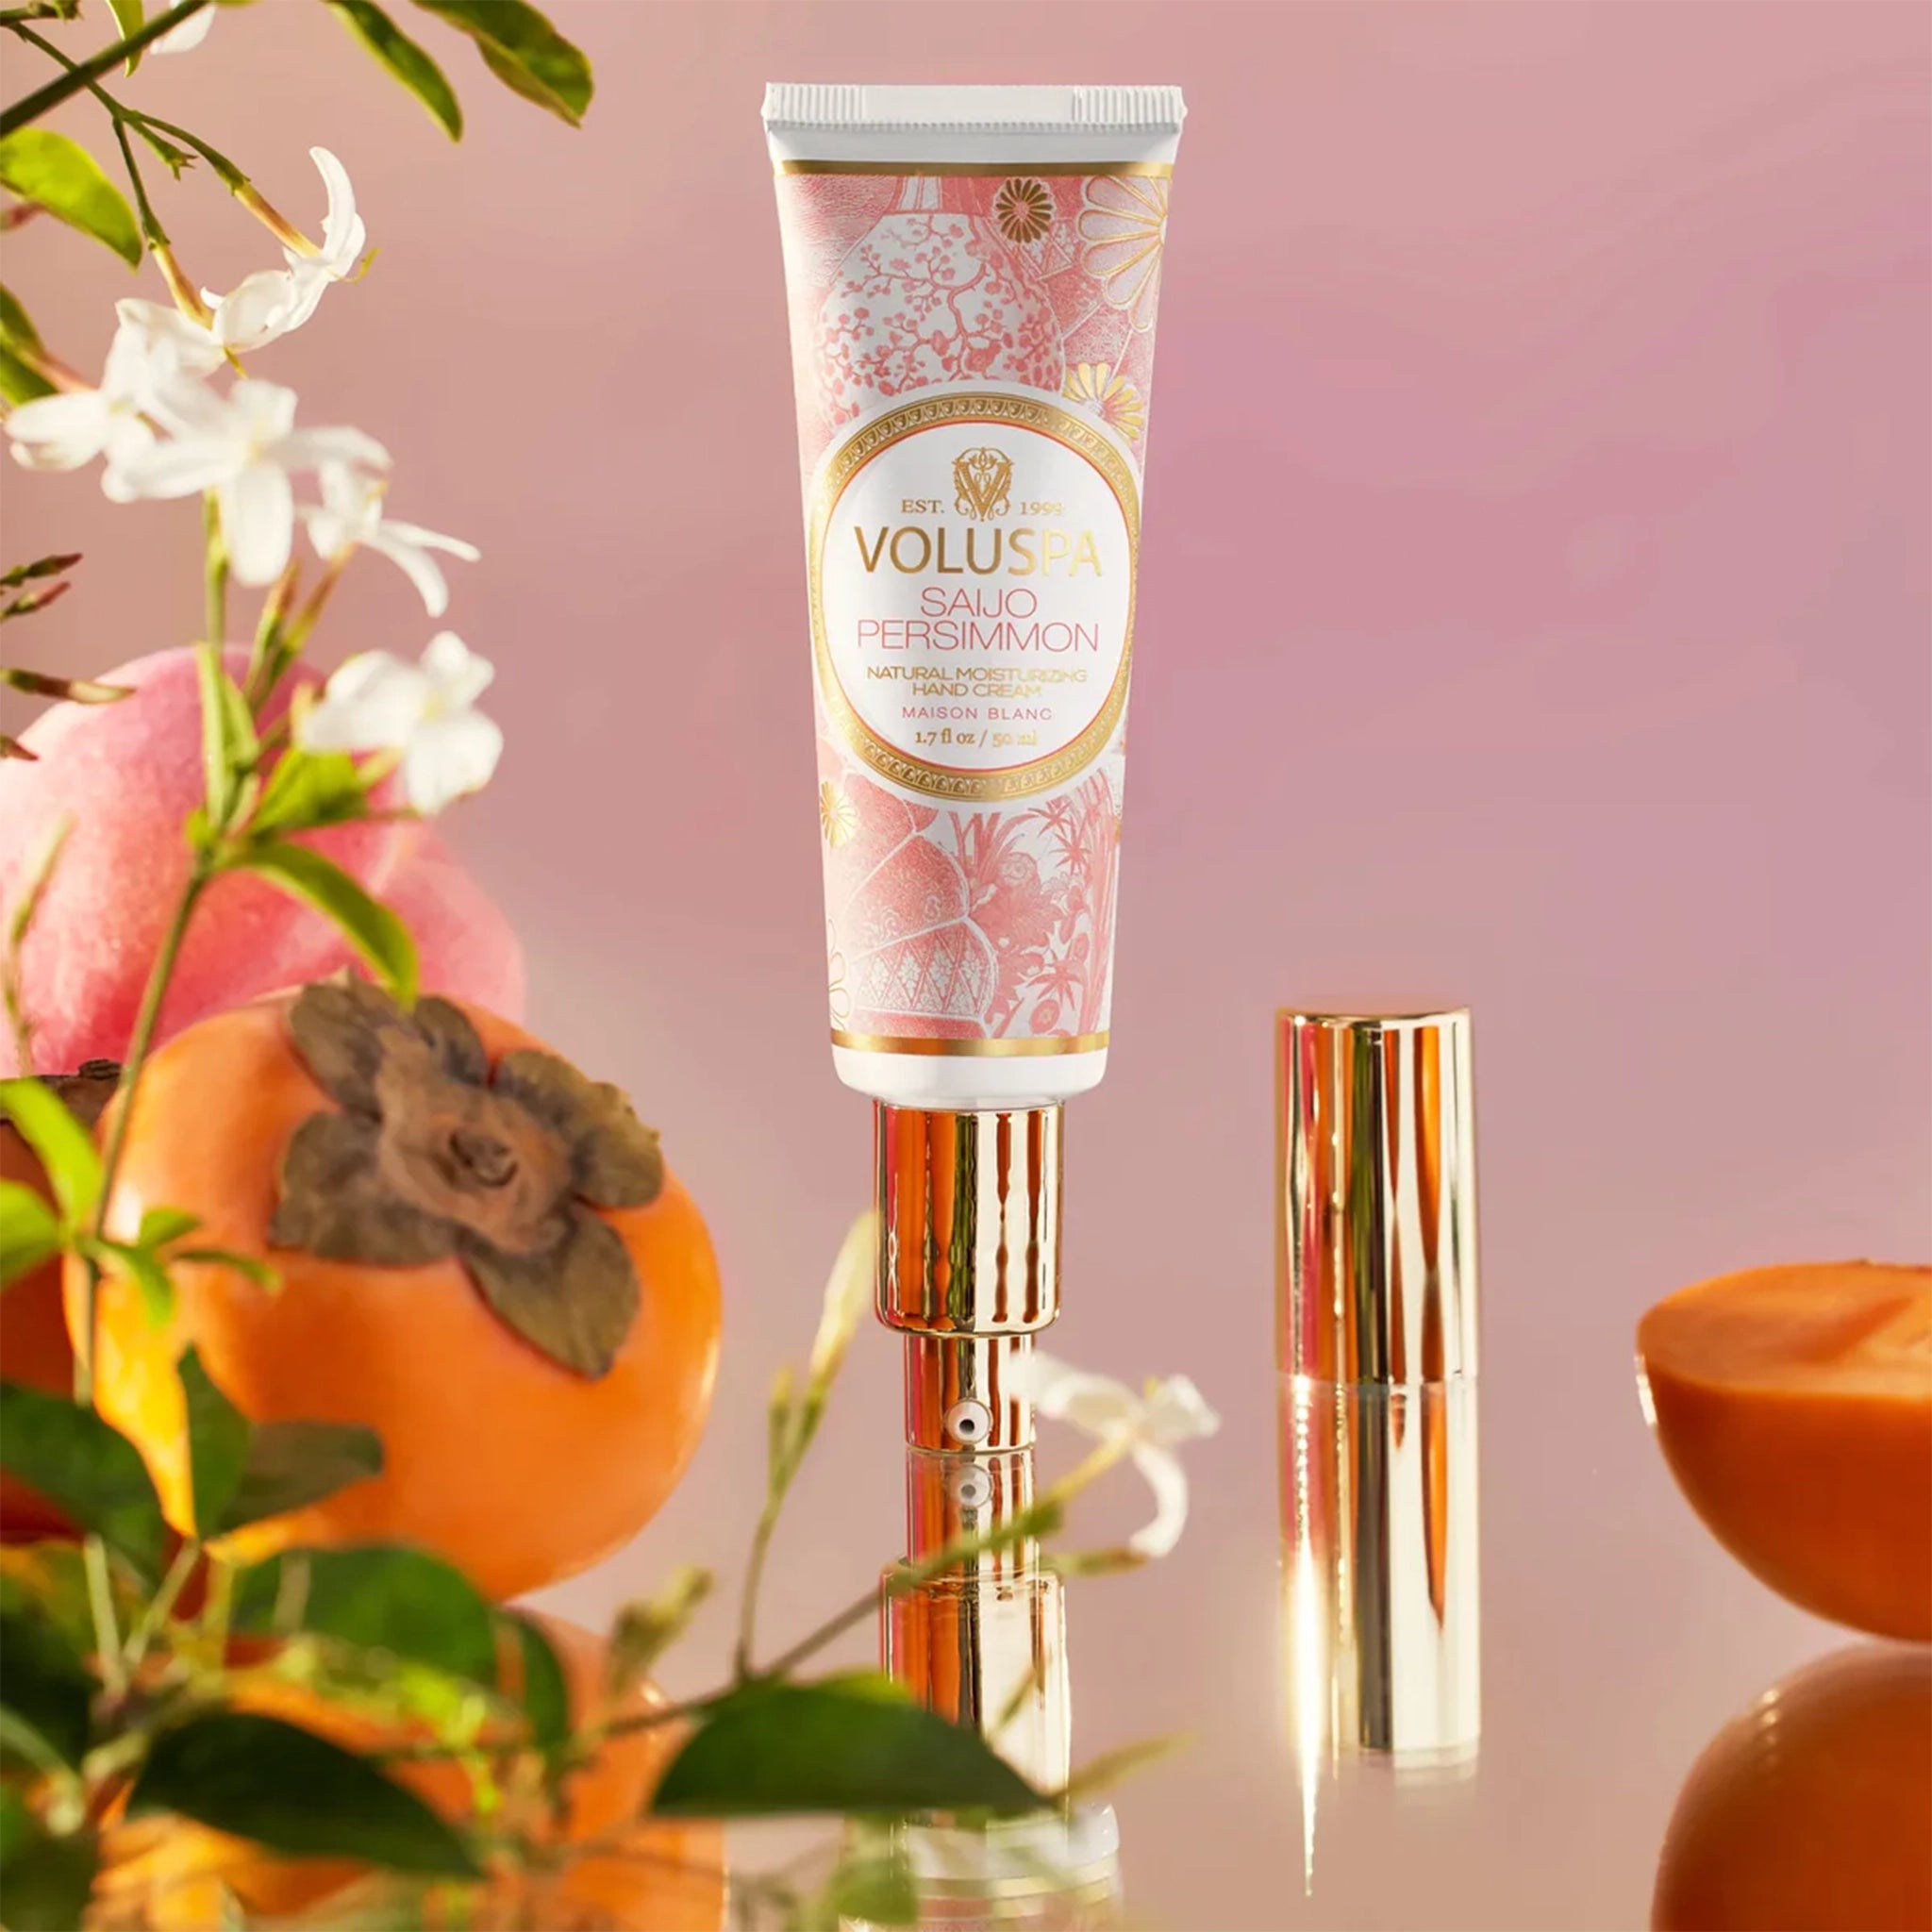 A tube of hand cream decorated with a pink floral pattern with gold text in the center that reads, "Voluspa Saijo Persimmon". The tube of hand cream has a gold pump and gold cap. It is photographed around florals and persimmon fruits.